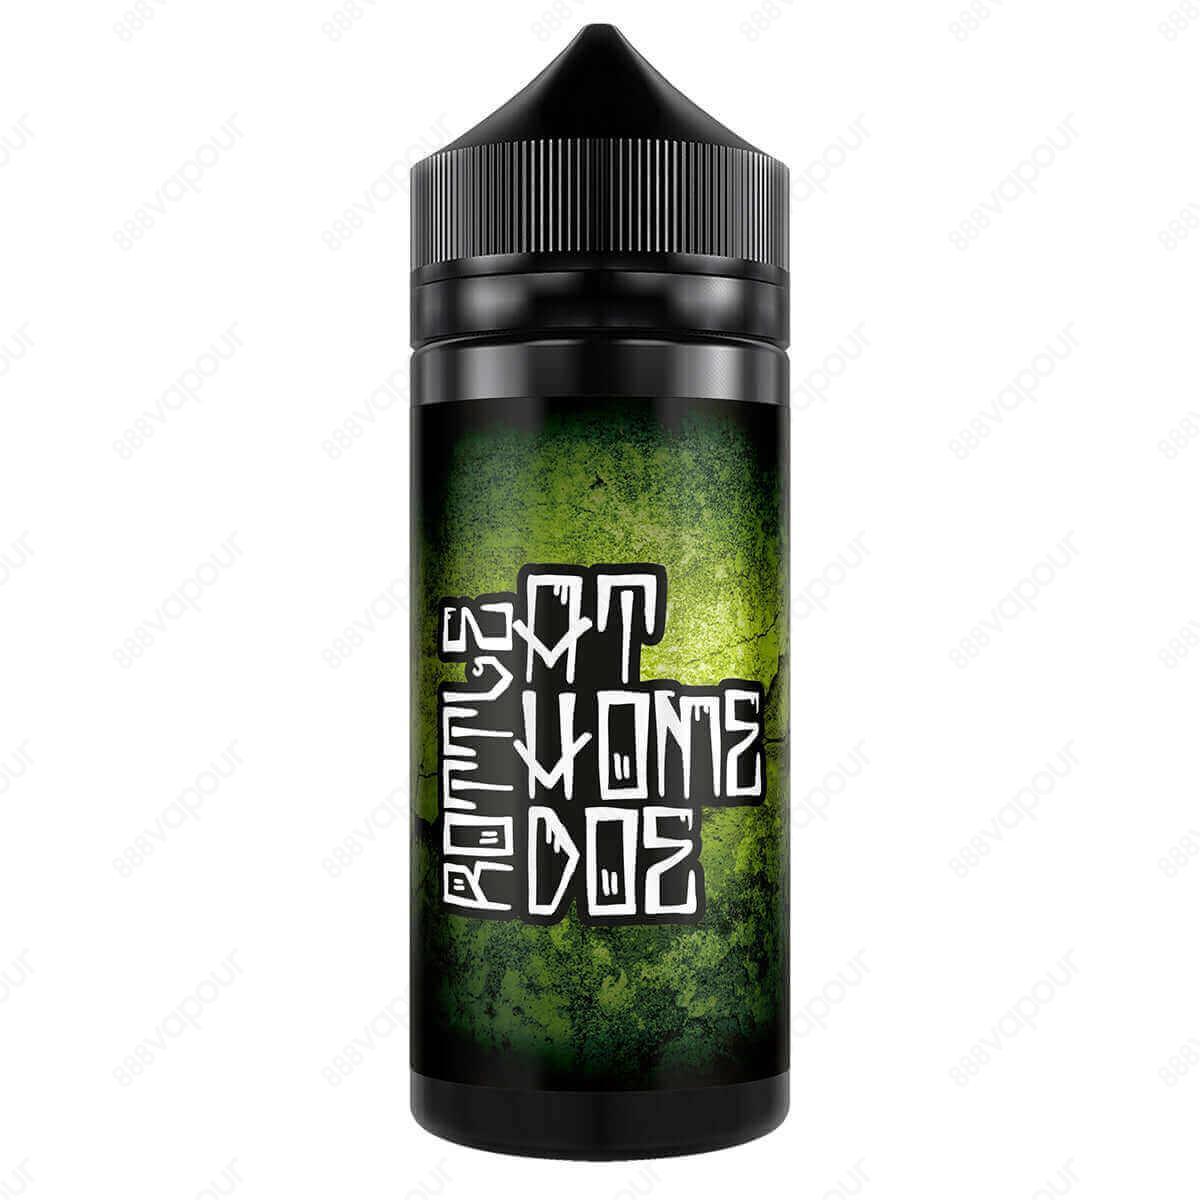 At Home Doe Rottle E-Liquid | £11.99 | 888 Vapour | At Home Doe Rottle e-liquid by The Yorkshire Vaper is a blend of mango, pineapple and guava. Rottle by At Home Doe is available in a 100ml 0mg shortfill, with space to add two 10ml 18mg nicotine shots to